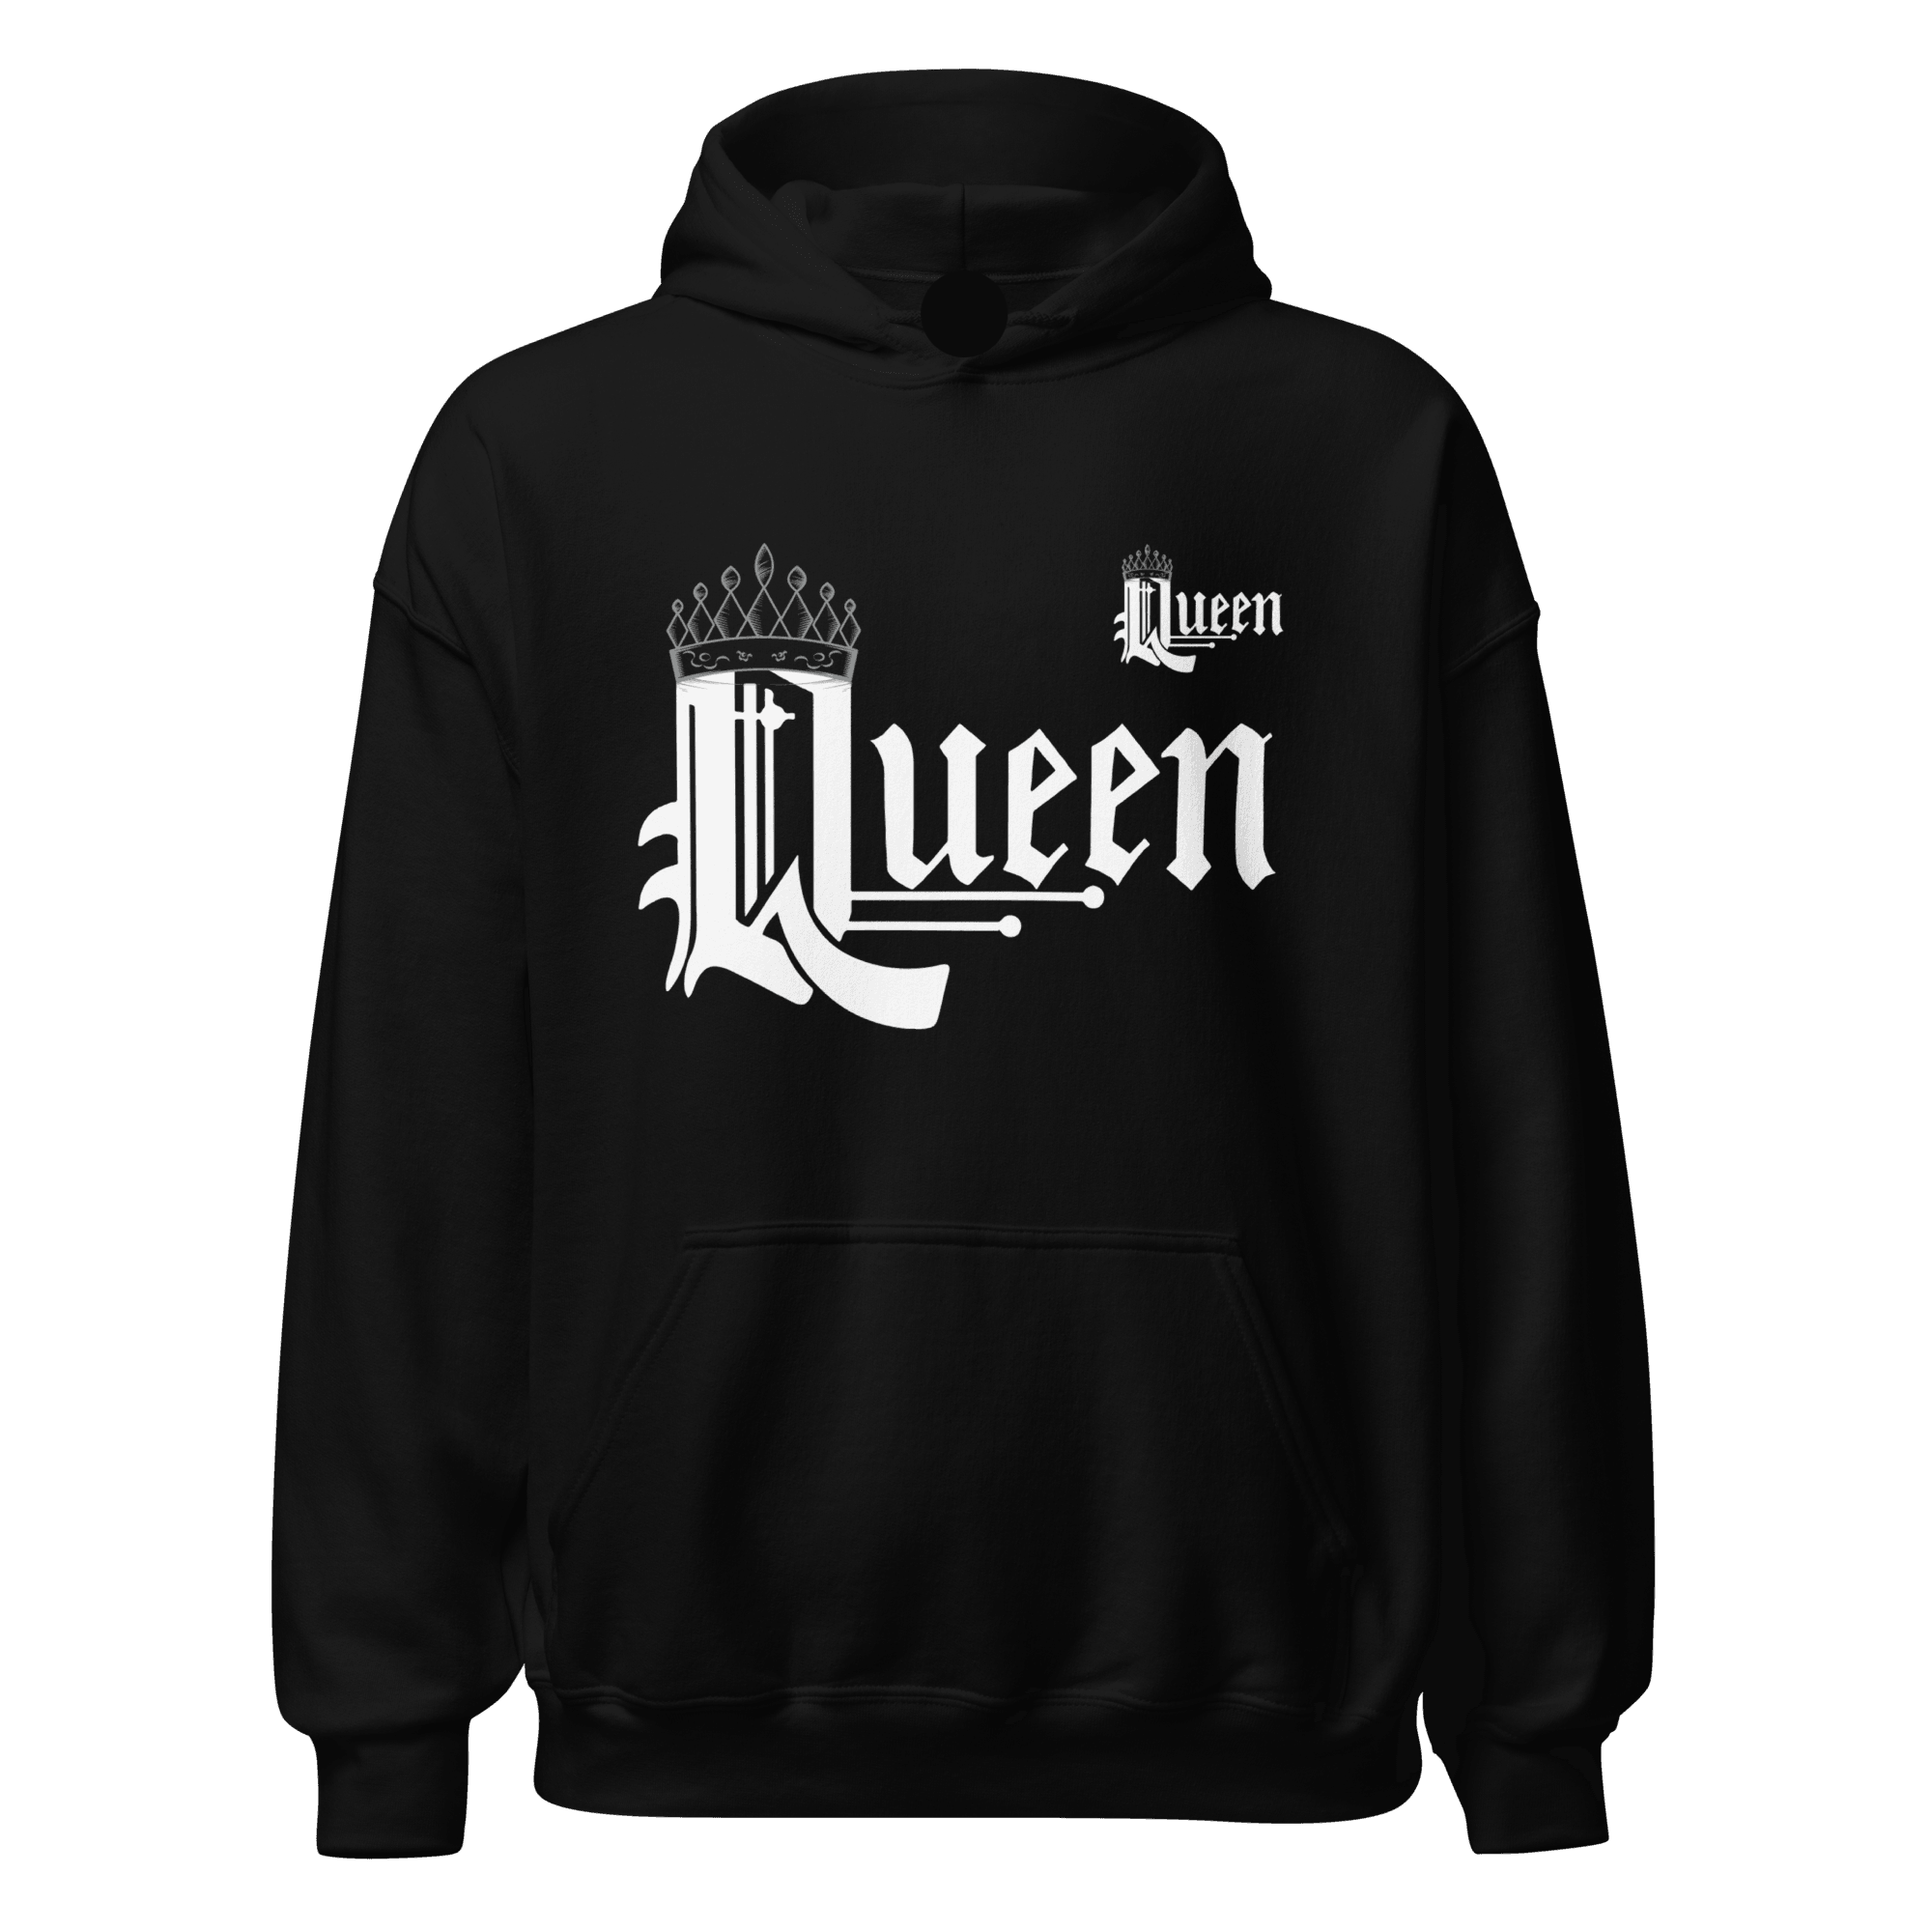 Blended Cotton Relationship Hoodie Set Majestic King/Majestic Queen Midweight Ultra Soft Pullovers - TopKoalaTee